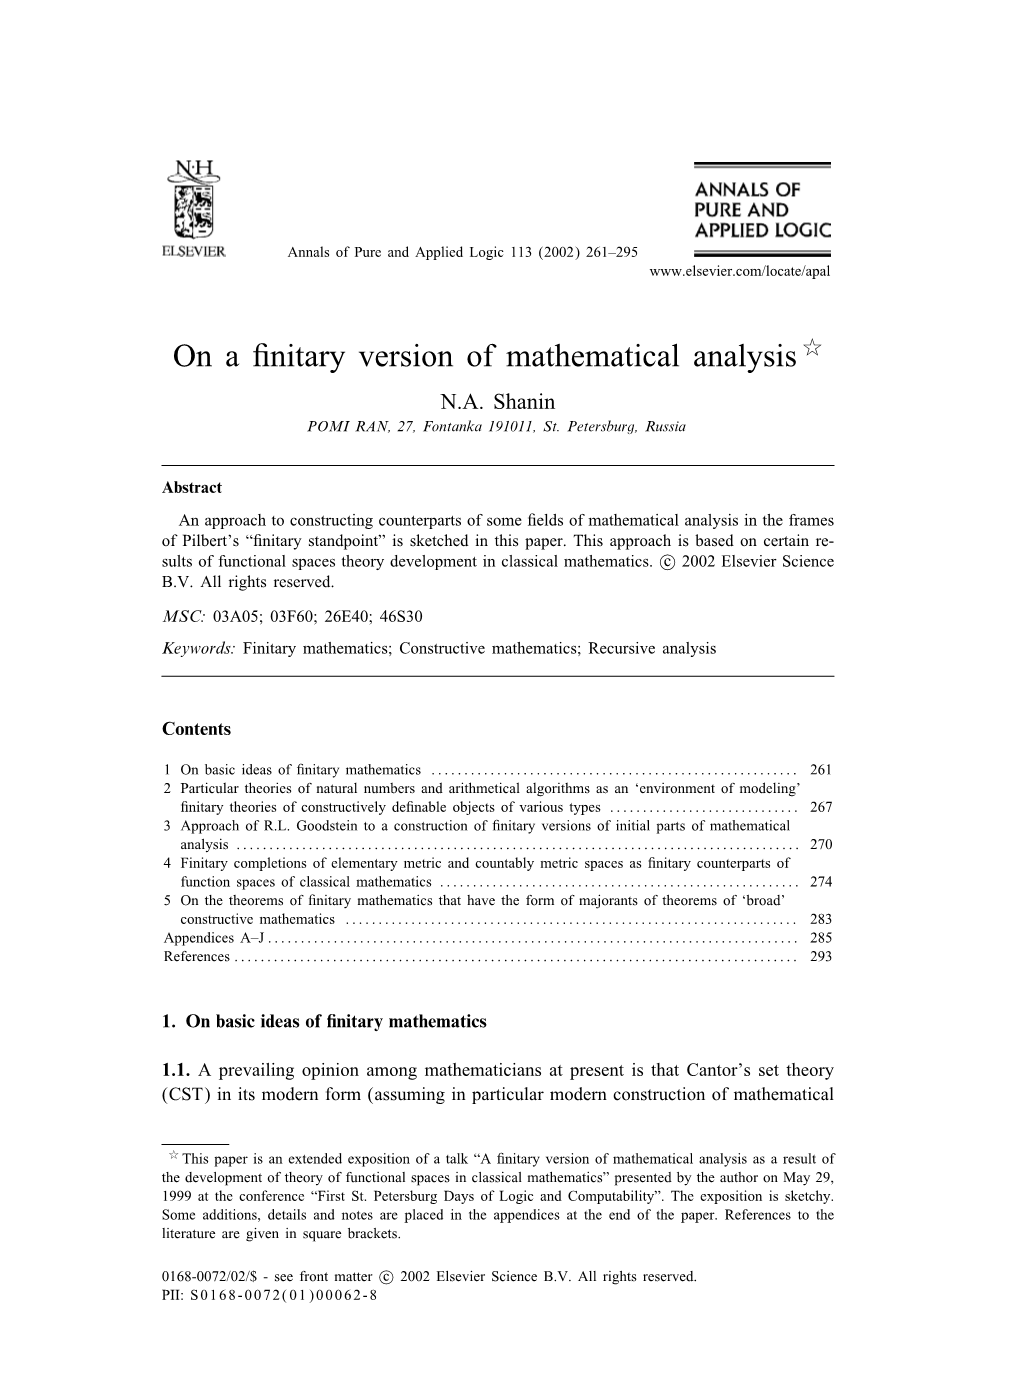 On a Finitary Version of Mathematical Analysis